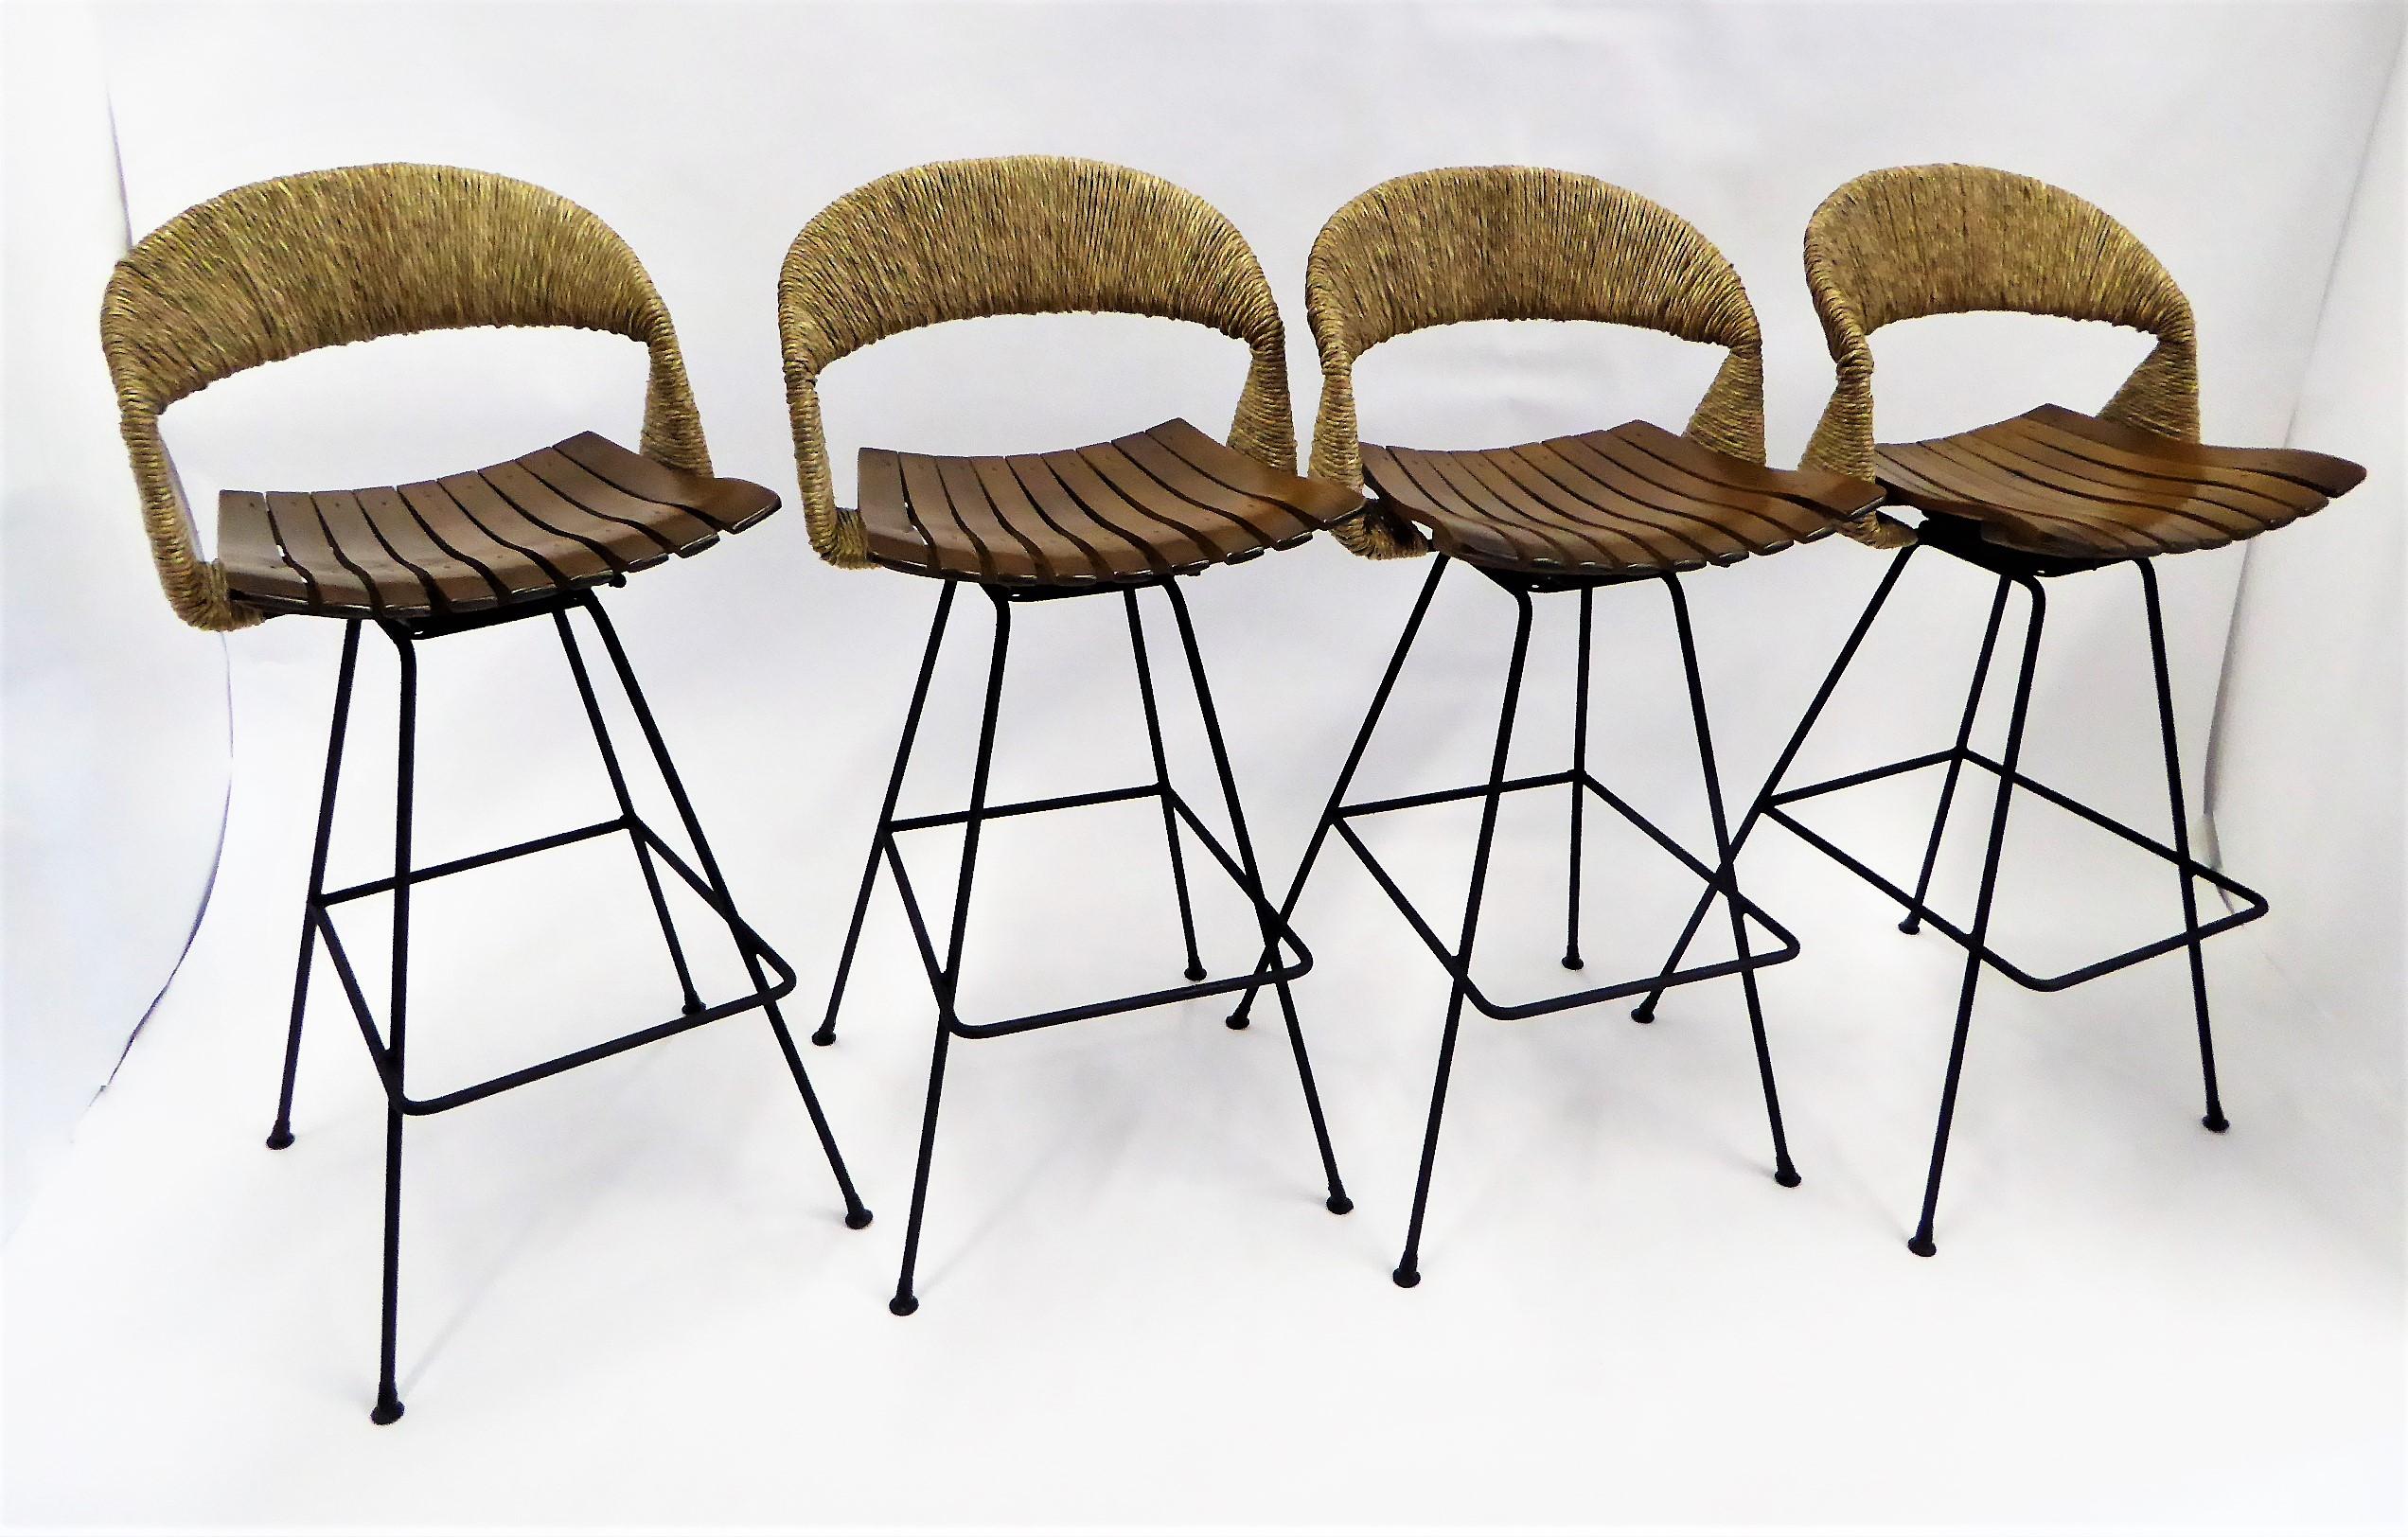 Designed by midcentury Master Arthur Umanoff and marketed by Raymor, here four Swiveling barstools featuring shapely handwoven raffia cord backs and wood slat seats all supported by a shaped Wrought Iron body with built in foot rests. New handwoven